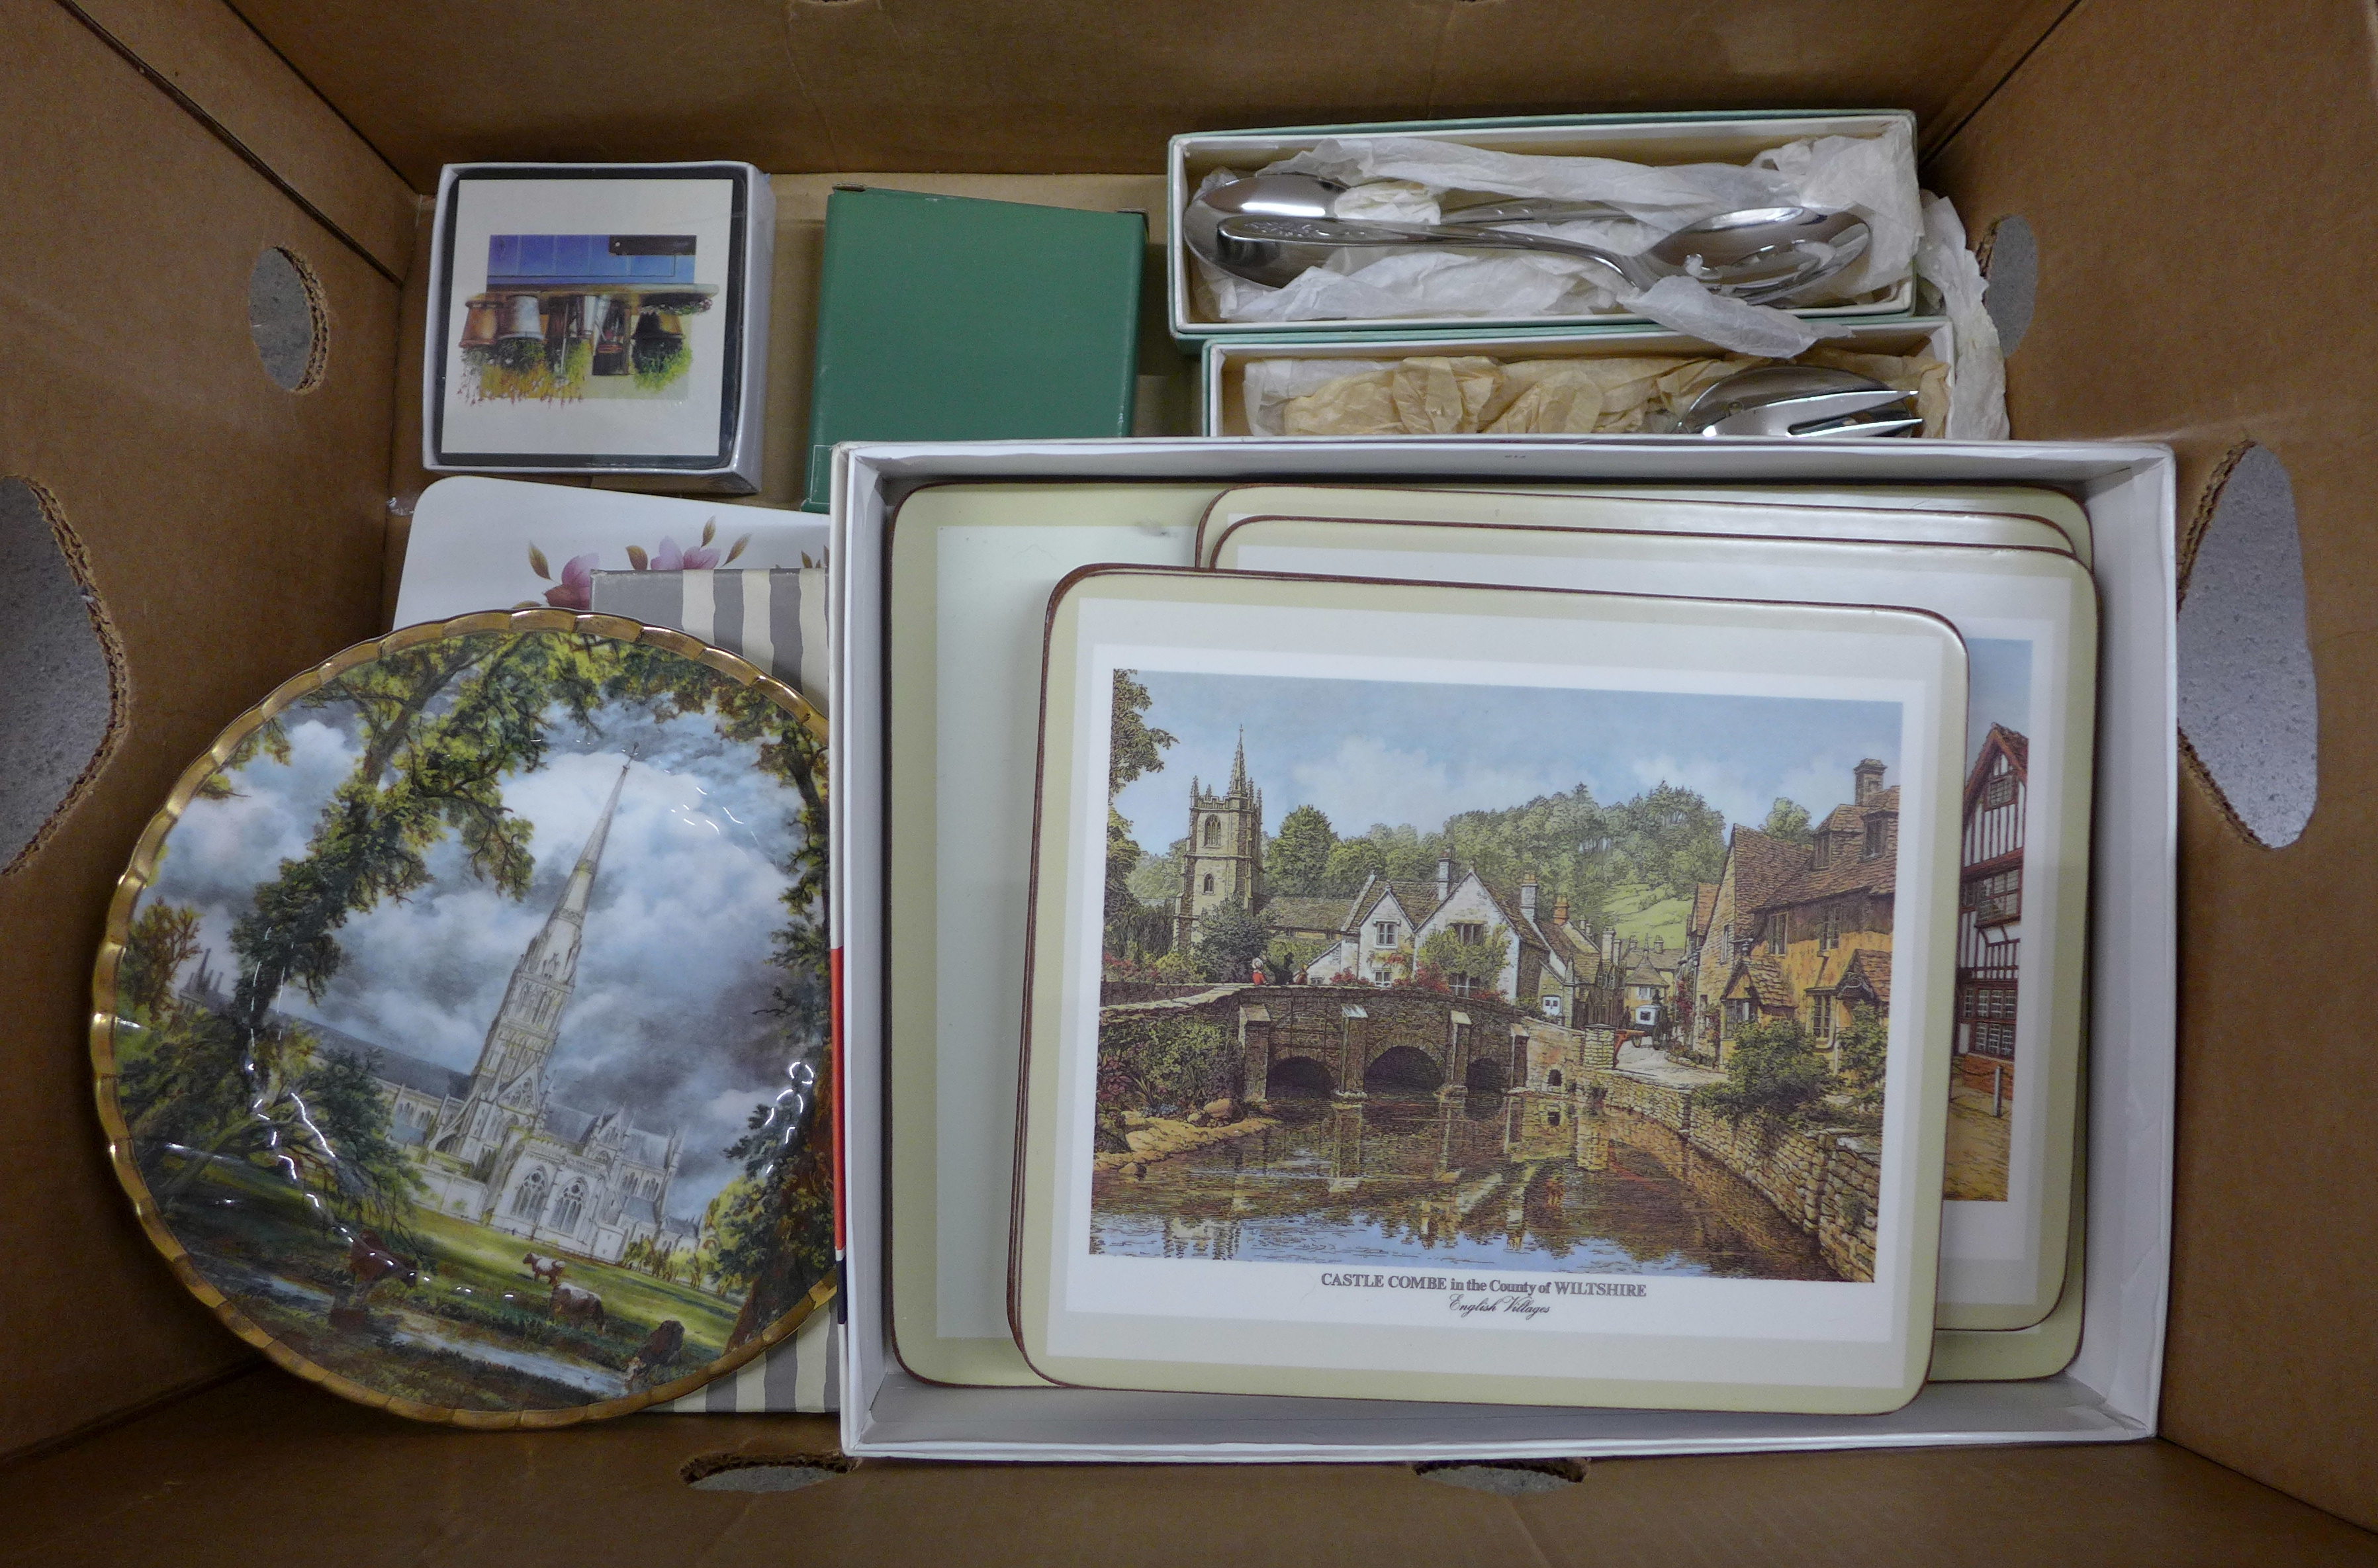 A collection of items including coasters, cutlery sets, salad servers, a plate, place mats, etc. **